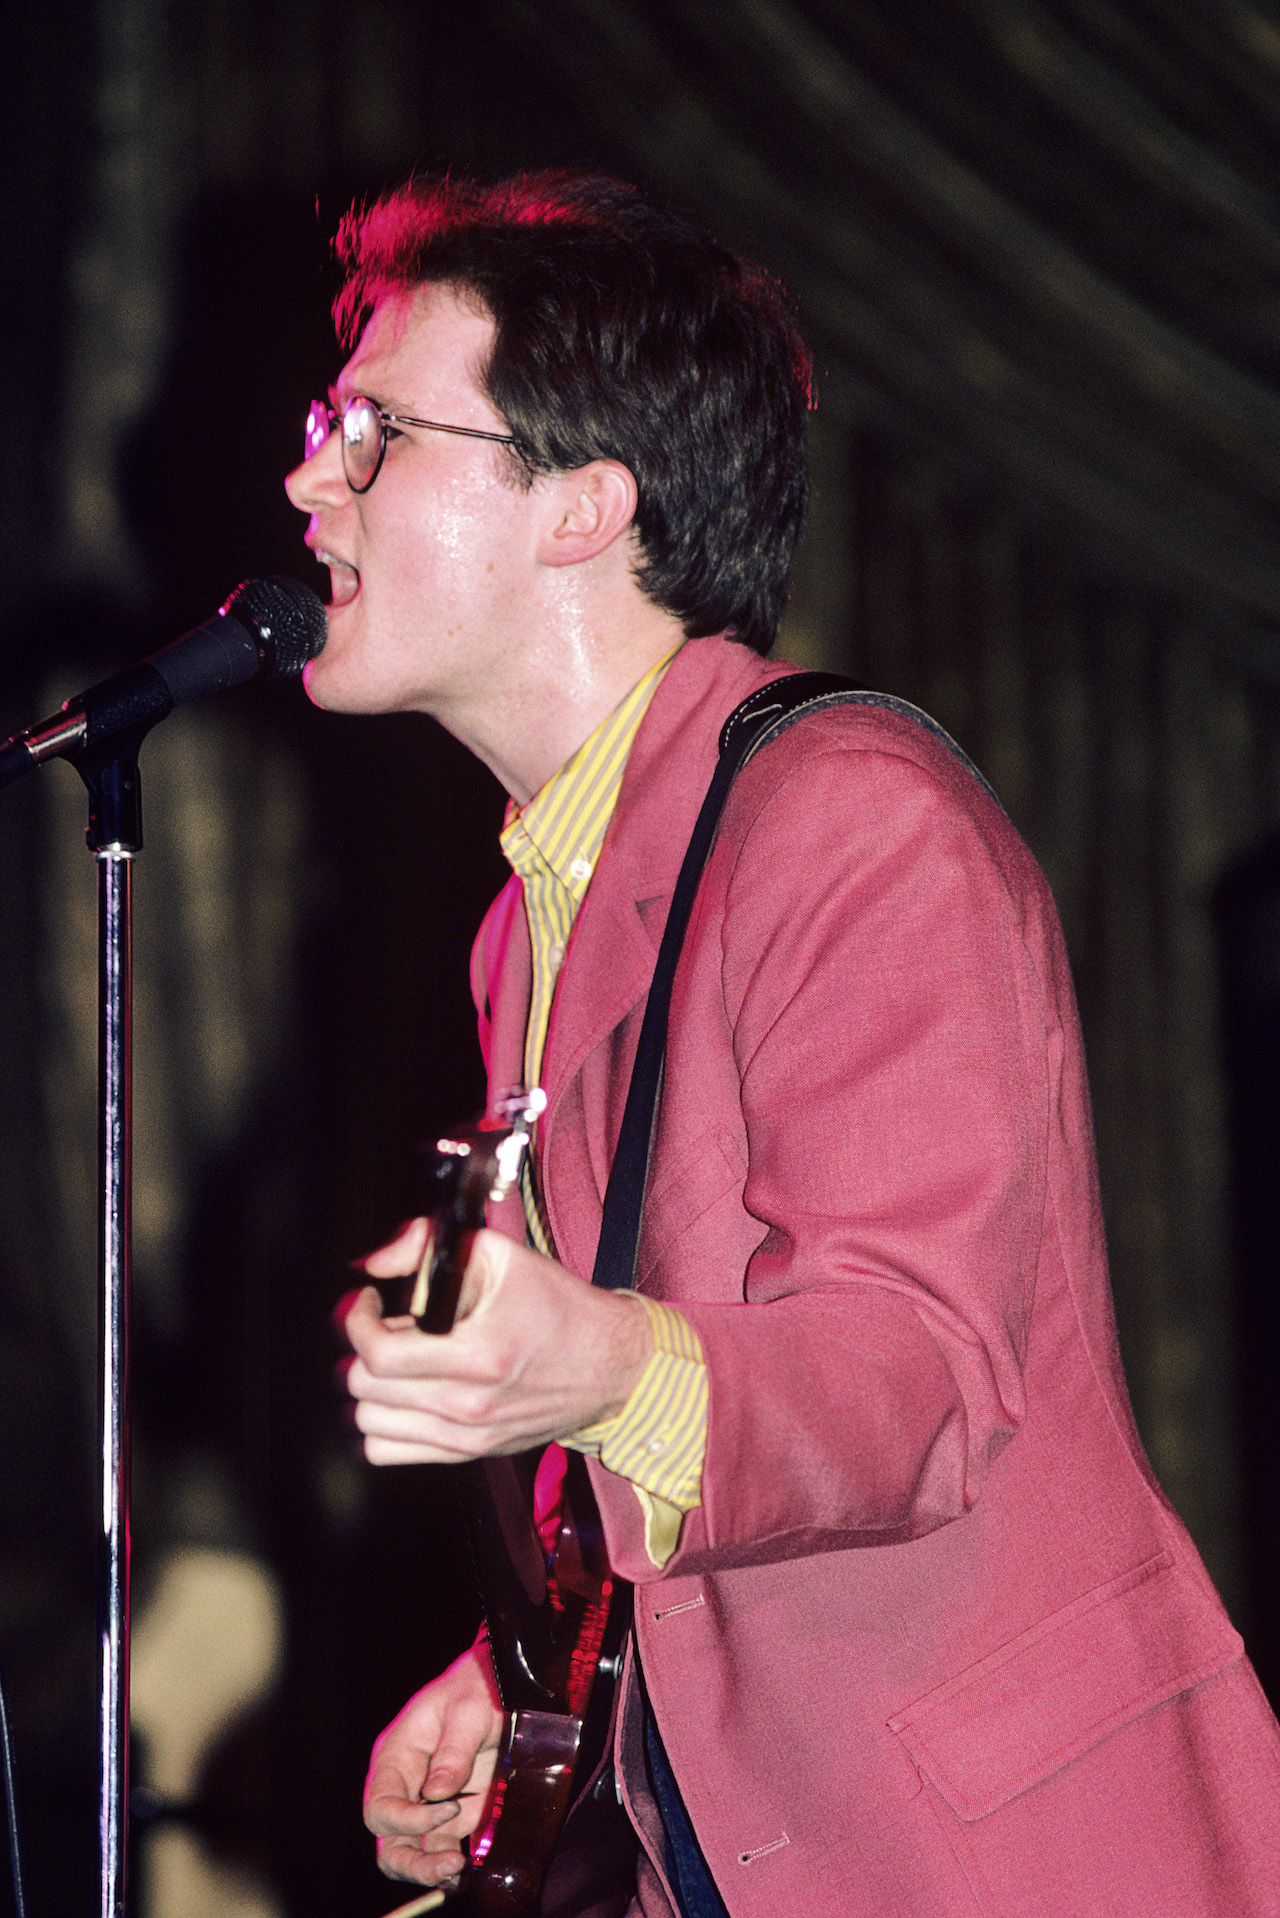 Marshall Crenshaw performs at the Roseland Ballroom in New York City on February 11, 1982